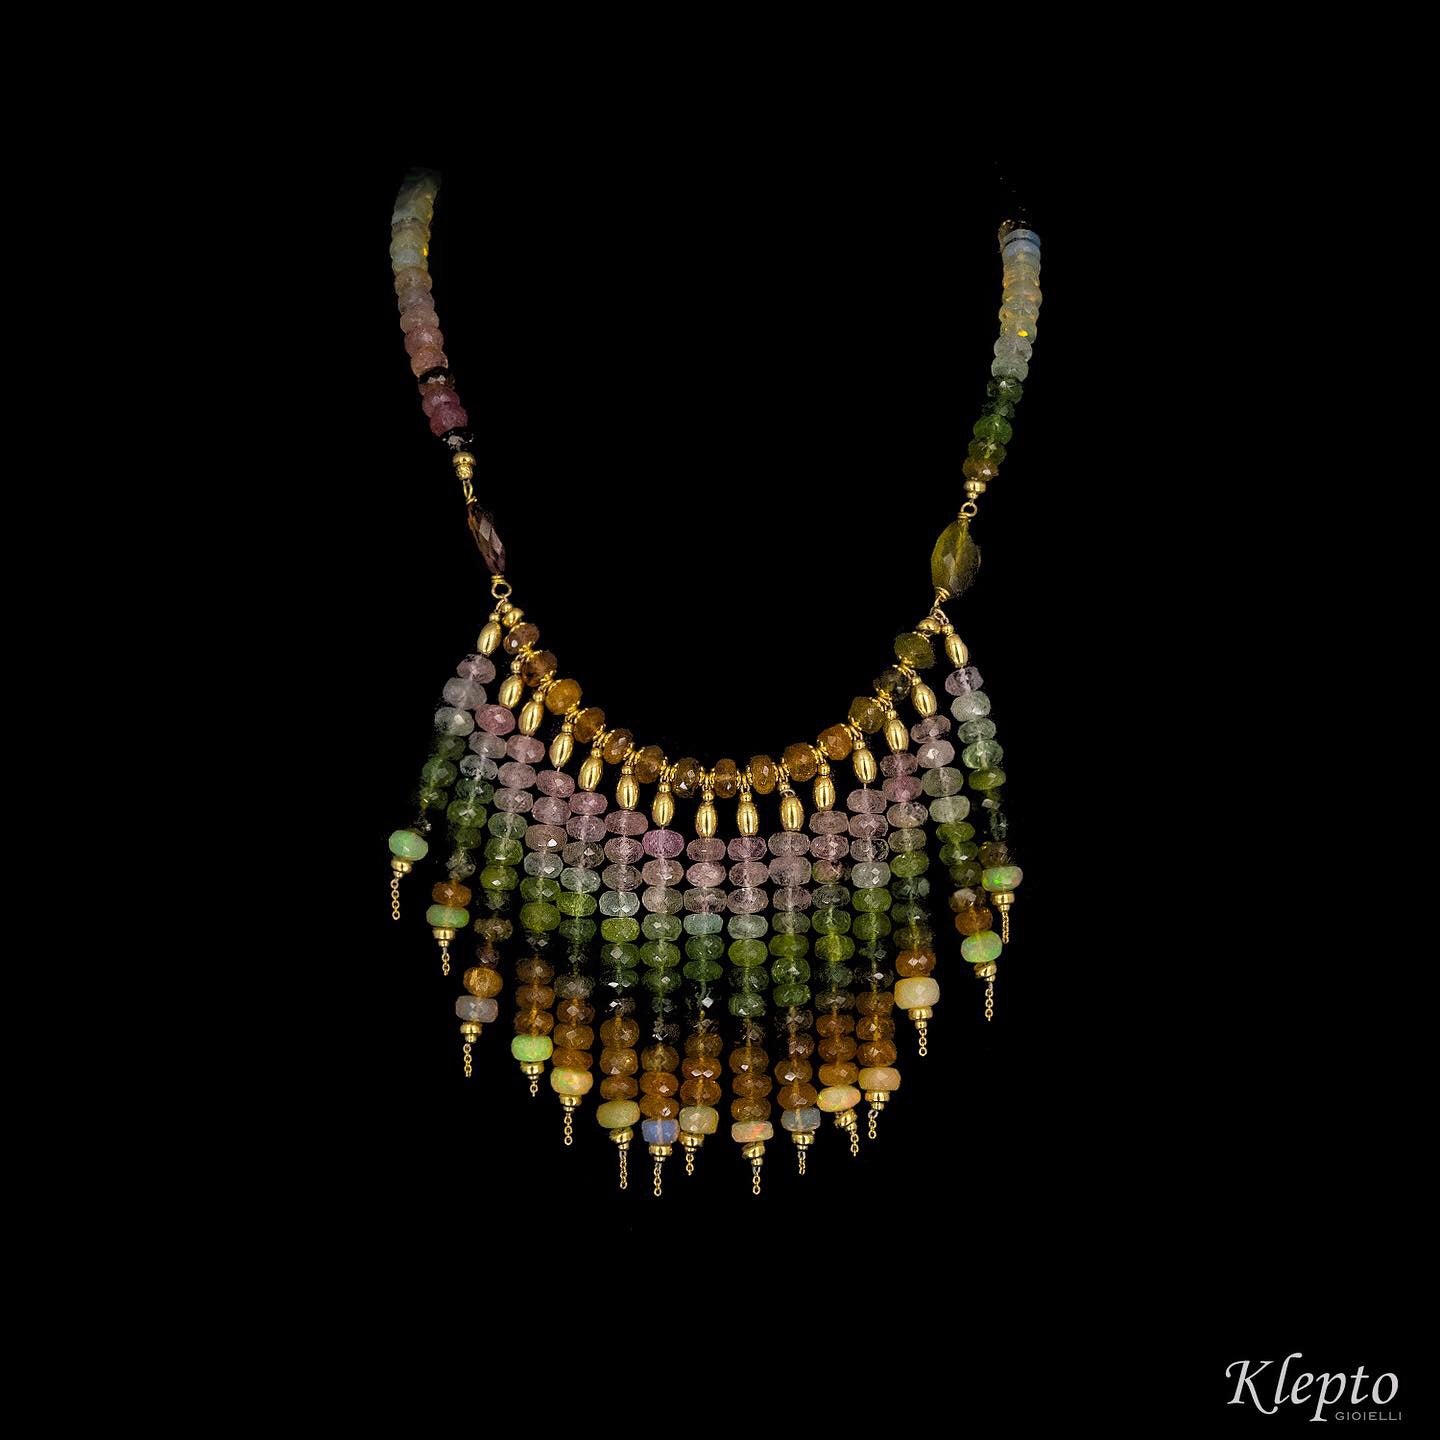 Choker necklace with cascade of tourmalines and opals